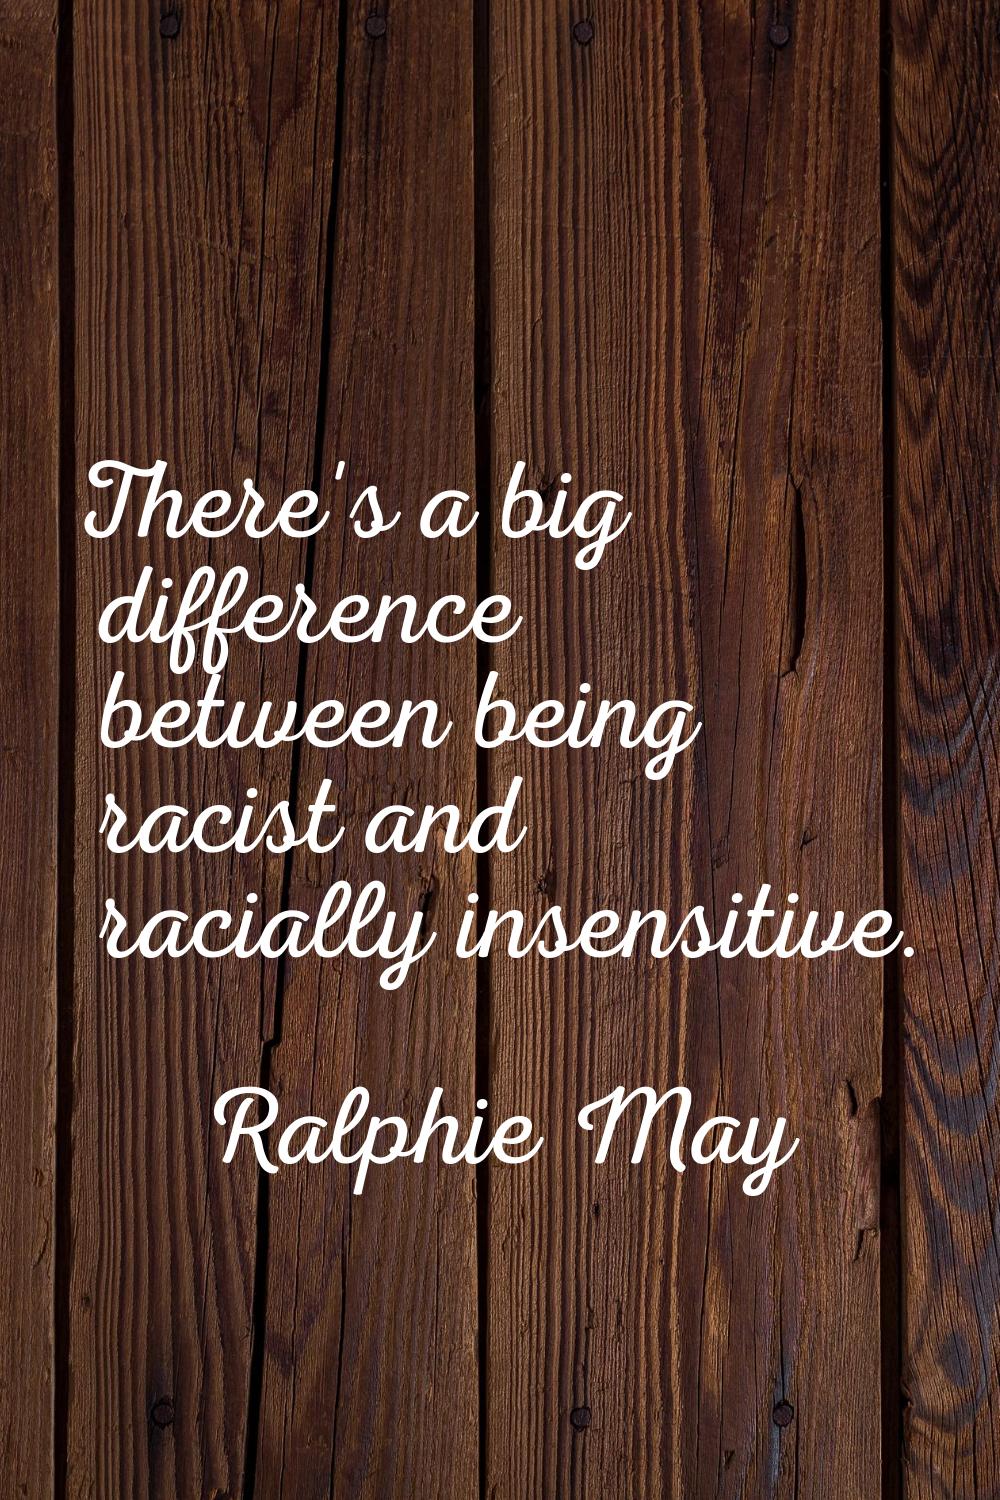 There's a big difference between being racist and racially insensitive.